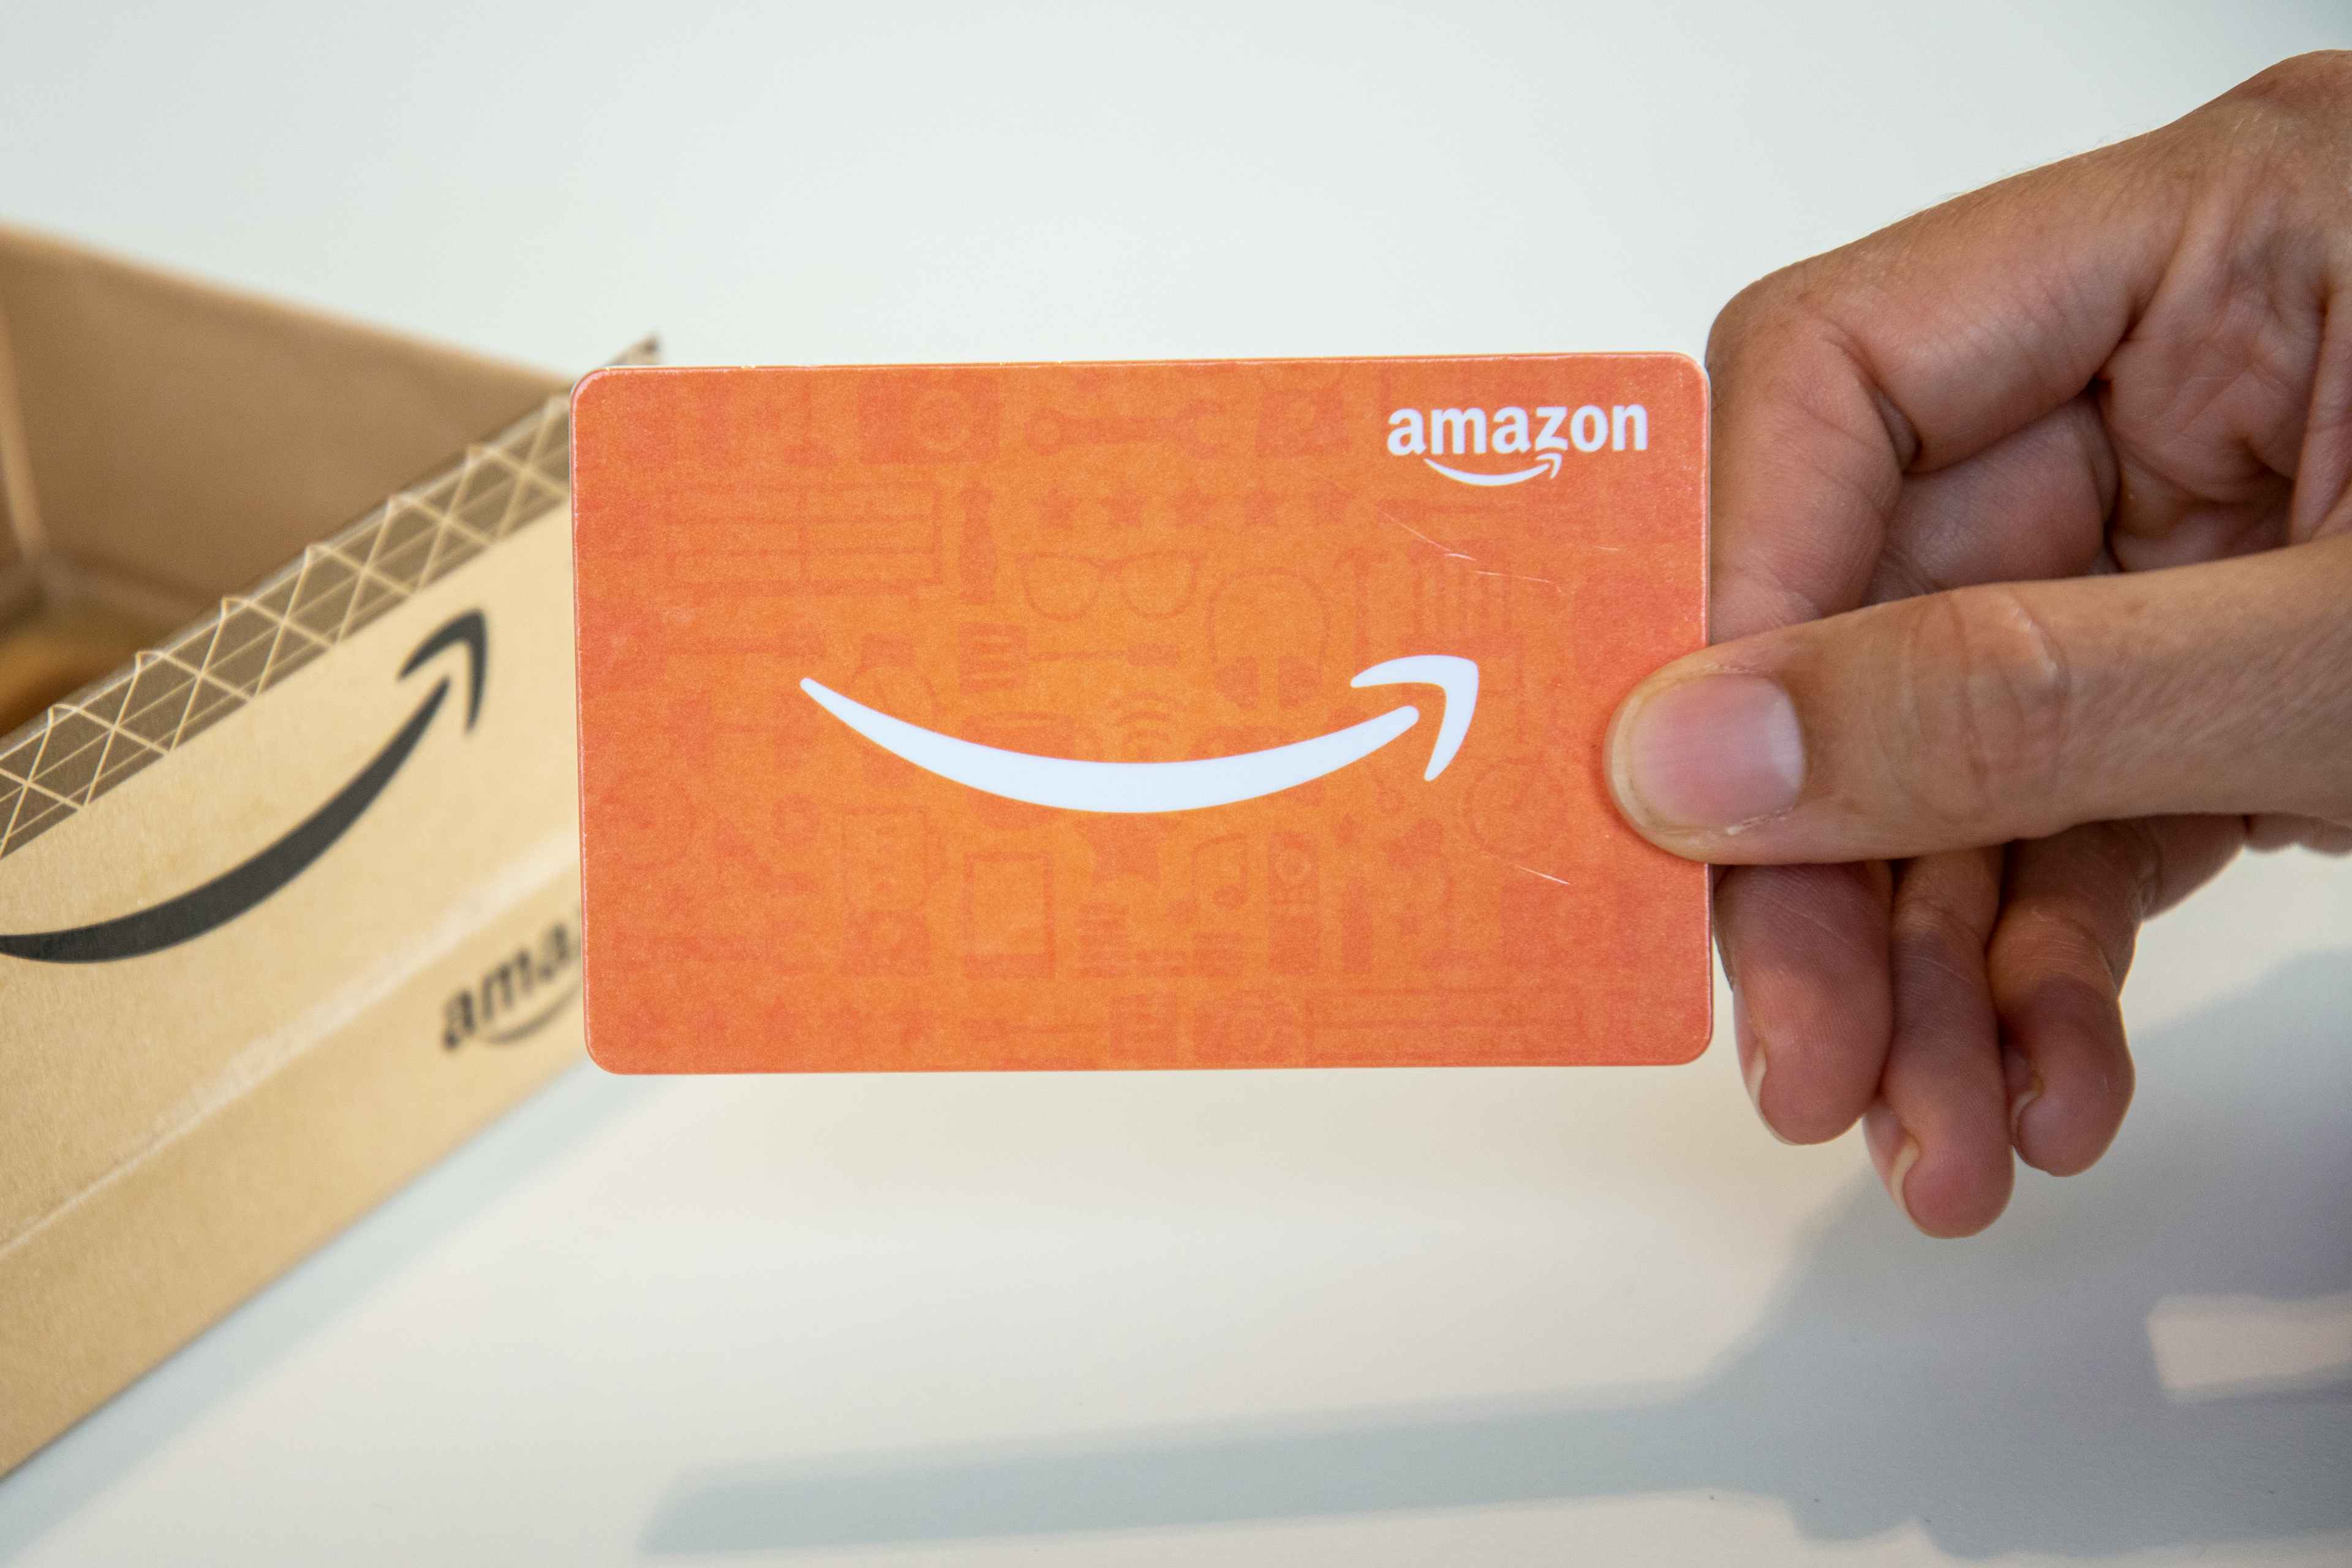 earn free gift cards - A person holding an Amazon gift card.